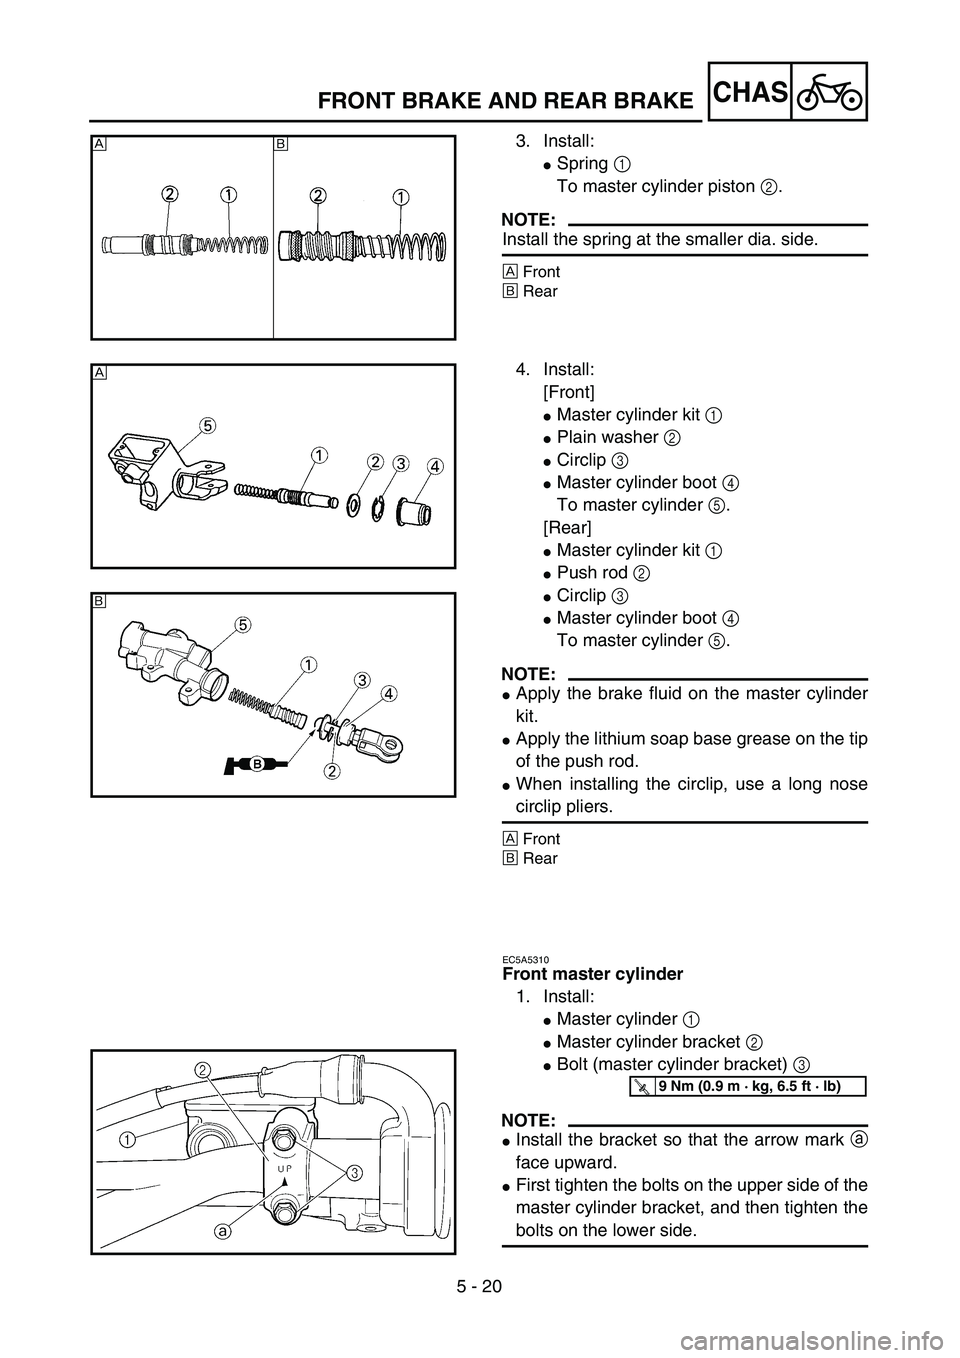 YAMAHA YZ450F 2004  Notices Demploi (in French) 5 - 20
CHASFRONT BRAKE AND REAR BRAKE
3. Install:
Spring 1 
To master cylinder piston 2.
NOTE:
Install the spring at the smaller dia. side.
ÅFront
ıRear
Åı
4. Install:
[Front]
Master cylinder ki